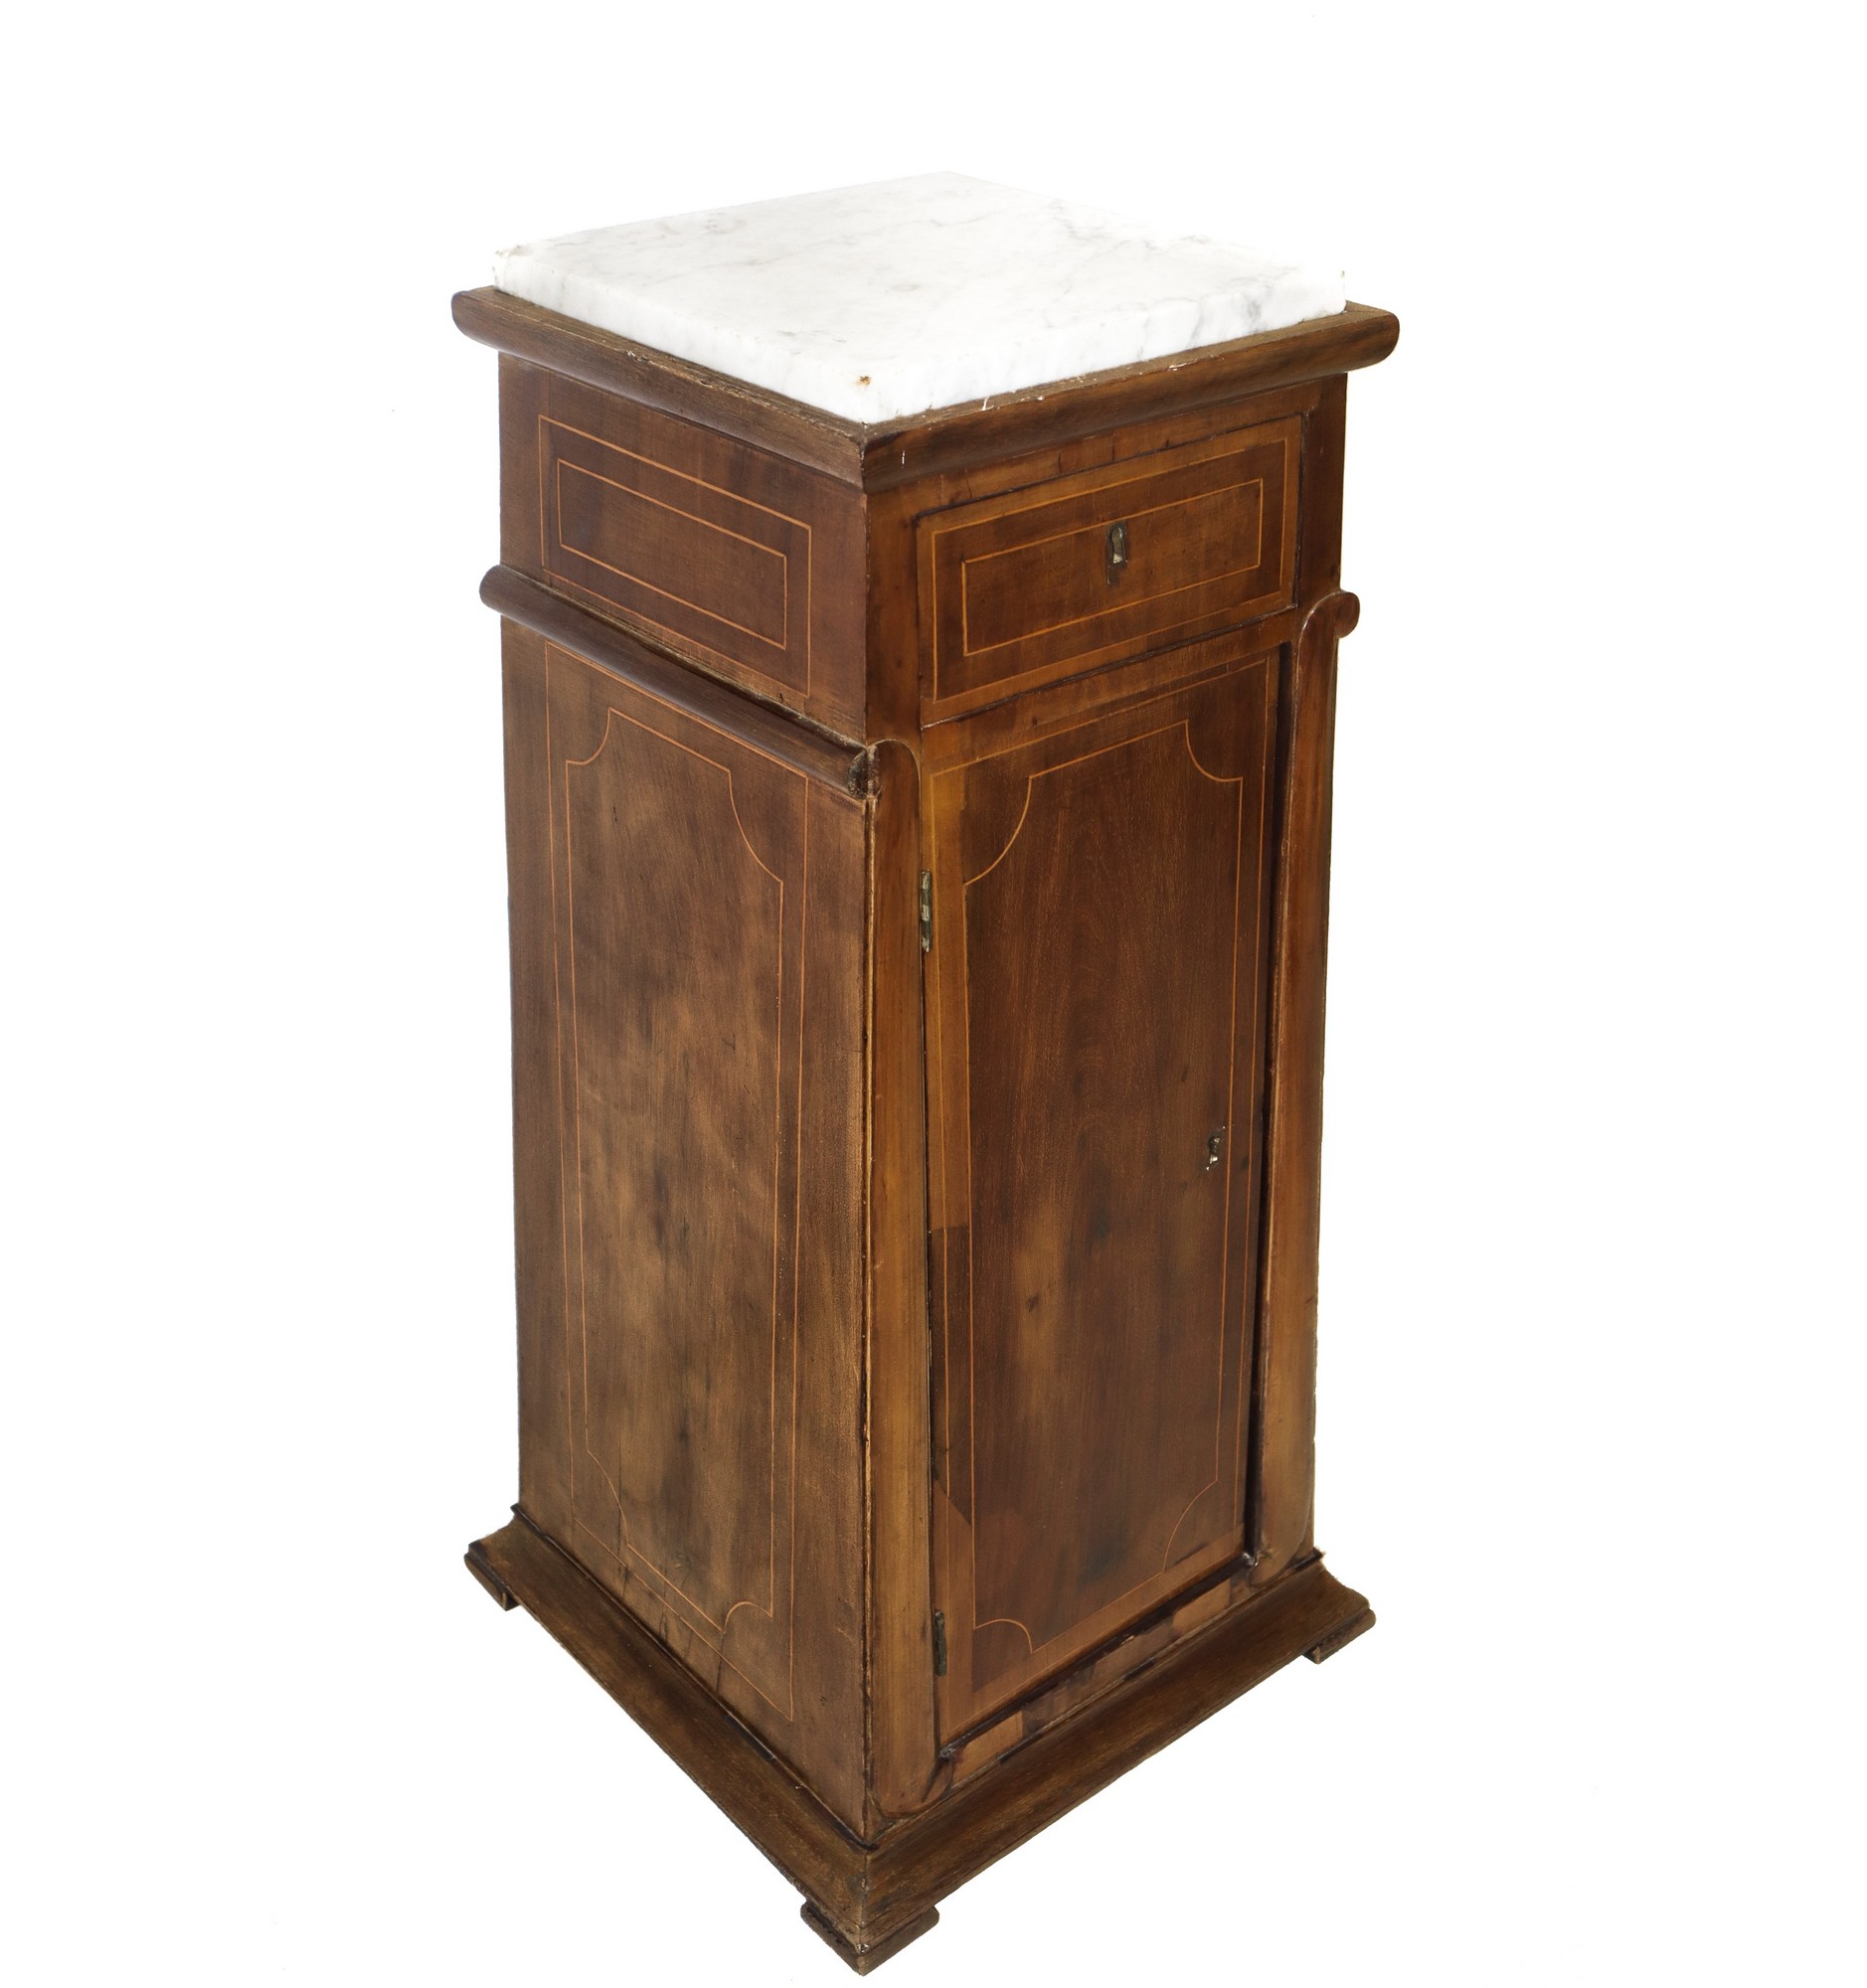 Pyramidal trunk center bedside table in walnut wood, Sicily 19th century - Image 2 of 5